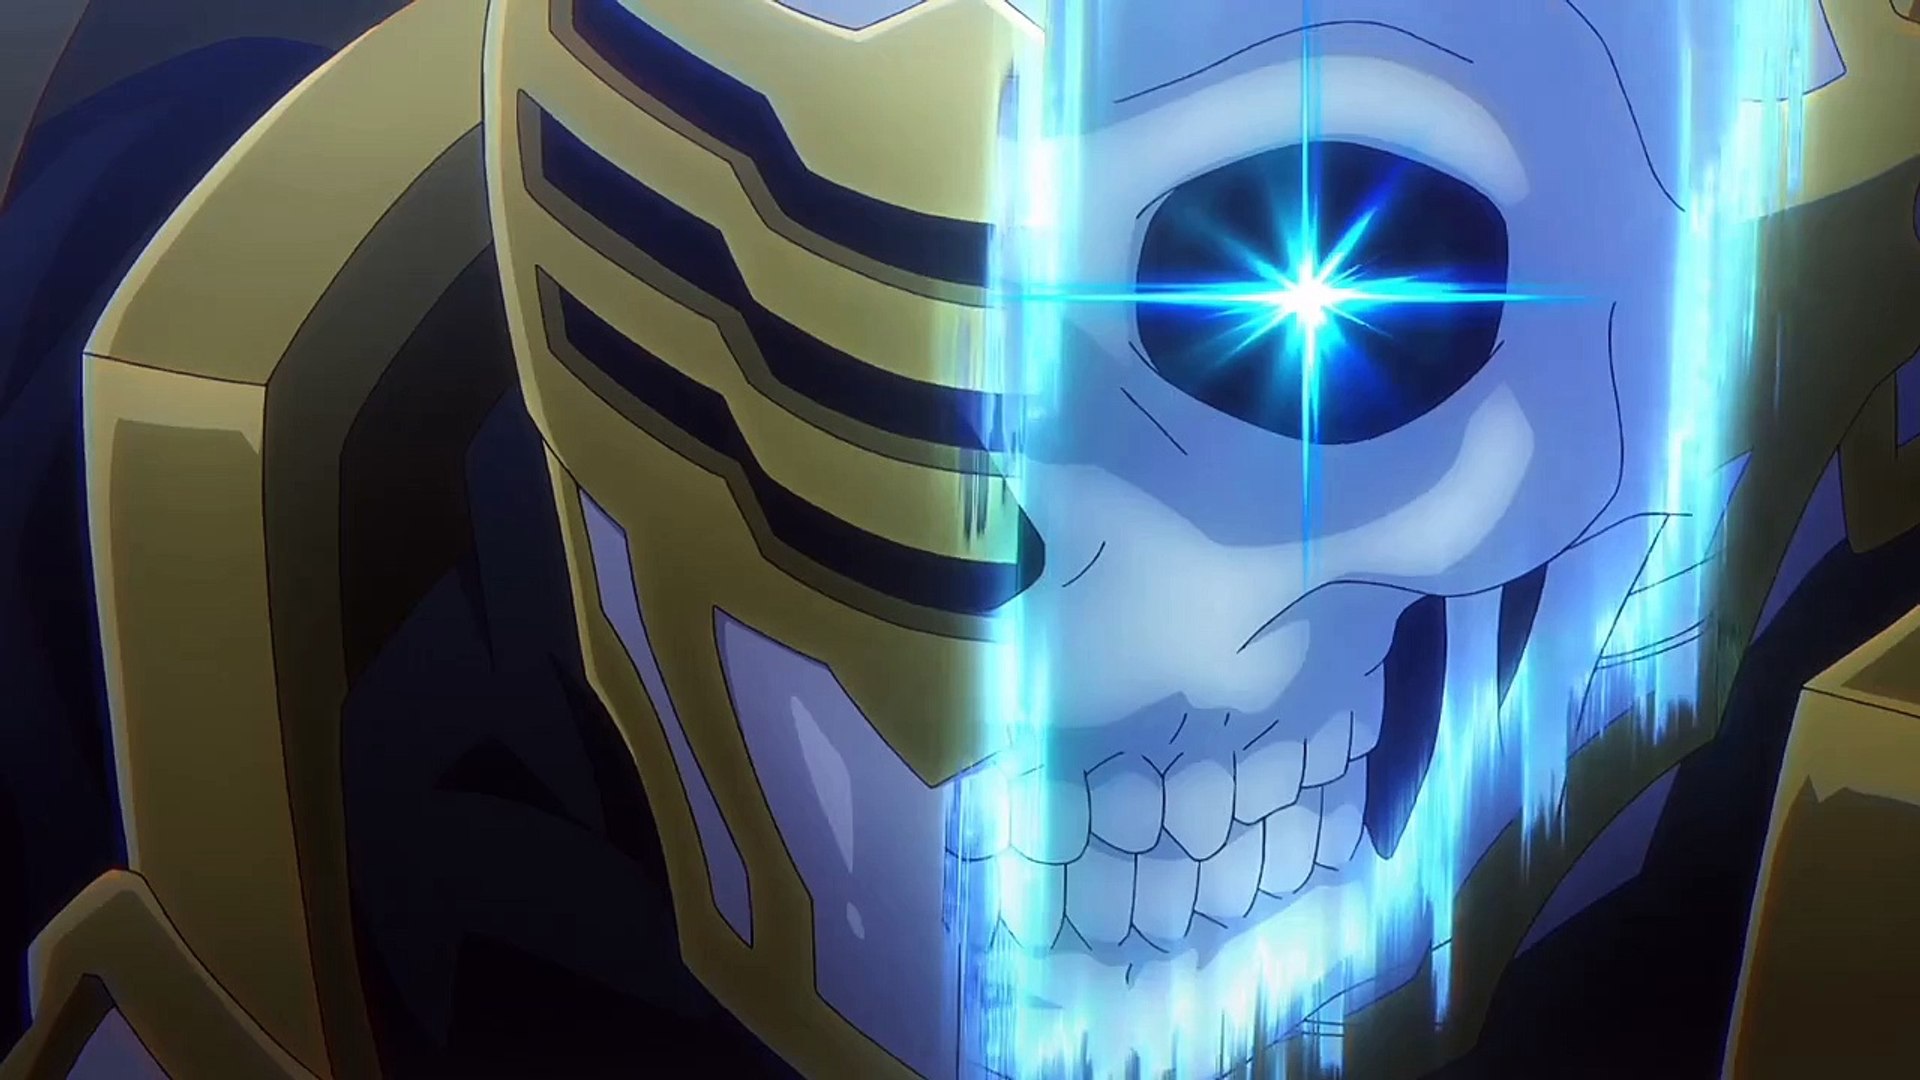 Skeleton Knight in Another World - EP 10 English Subbed - video Dailymotion